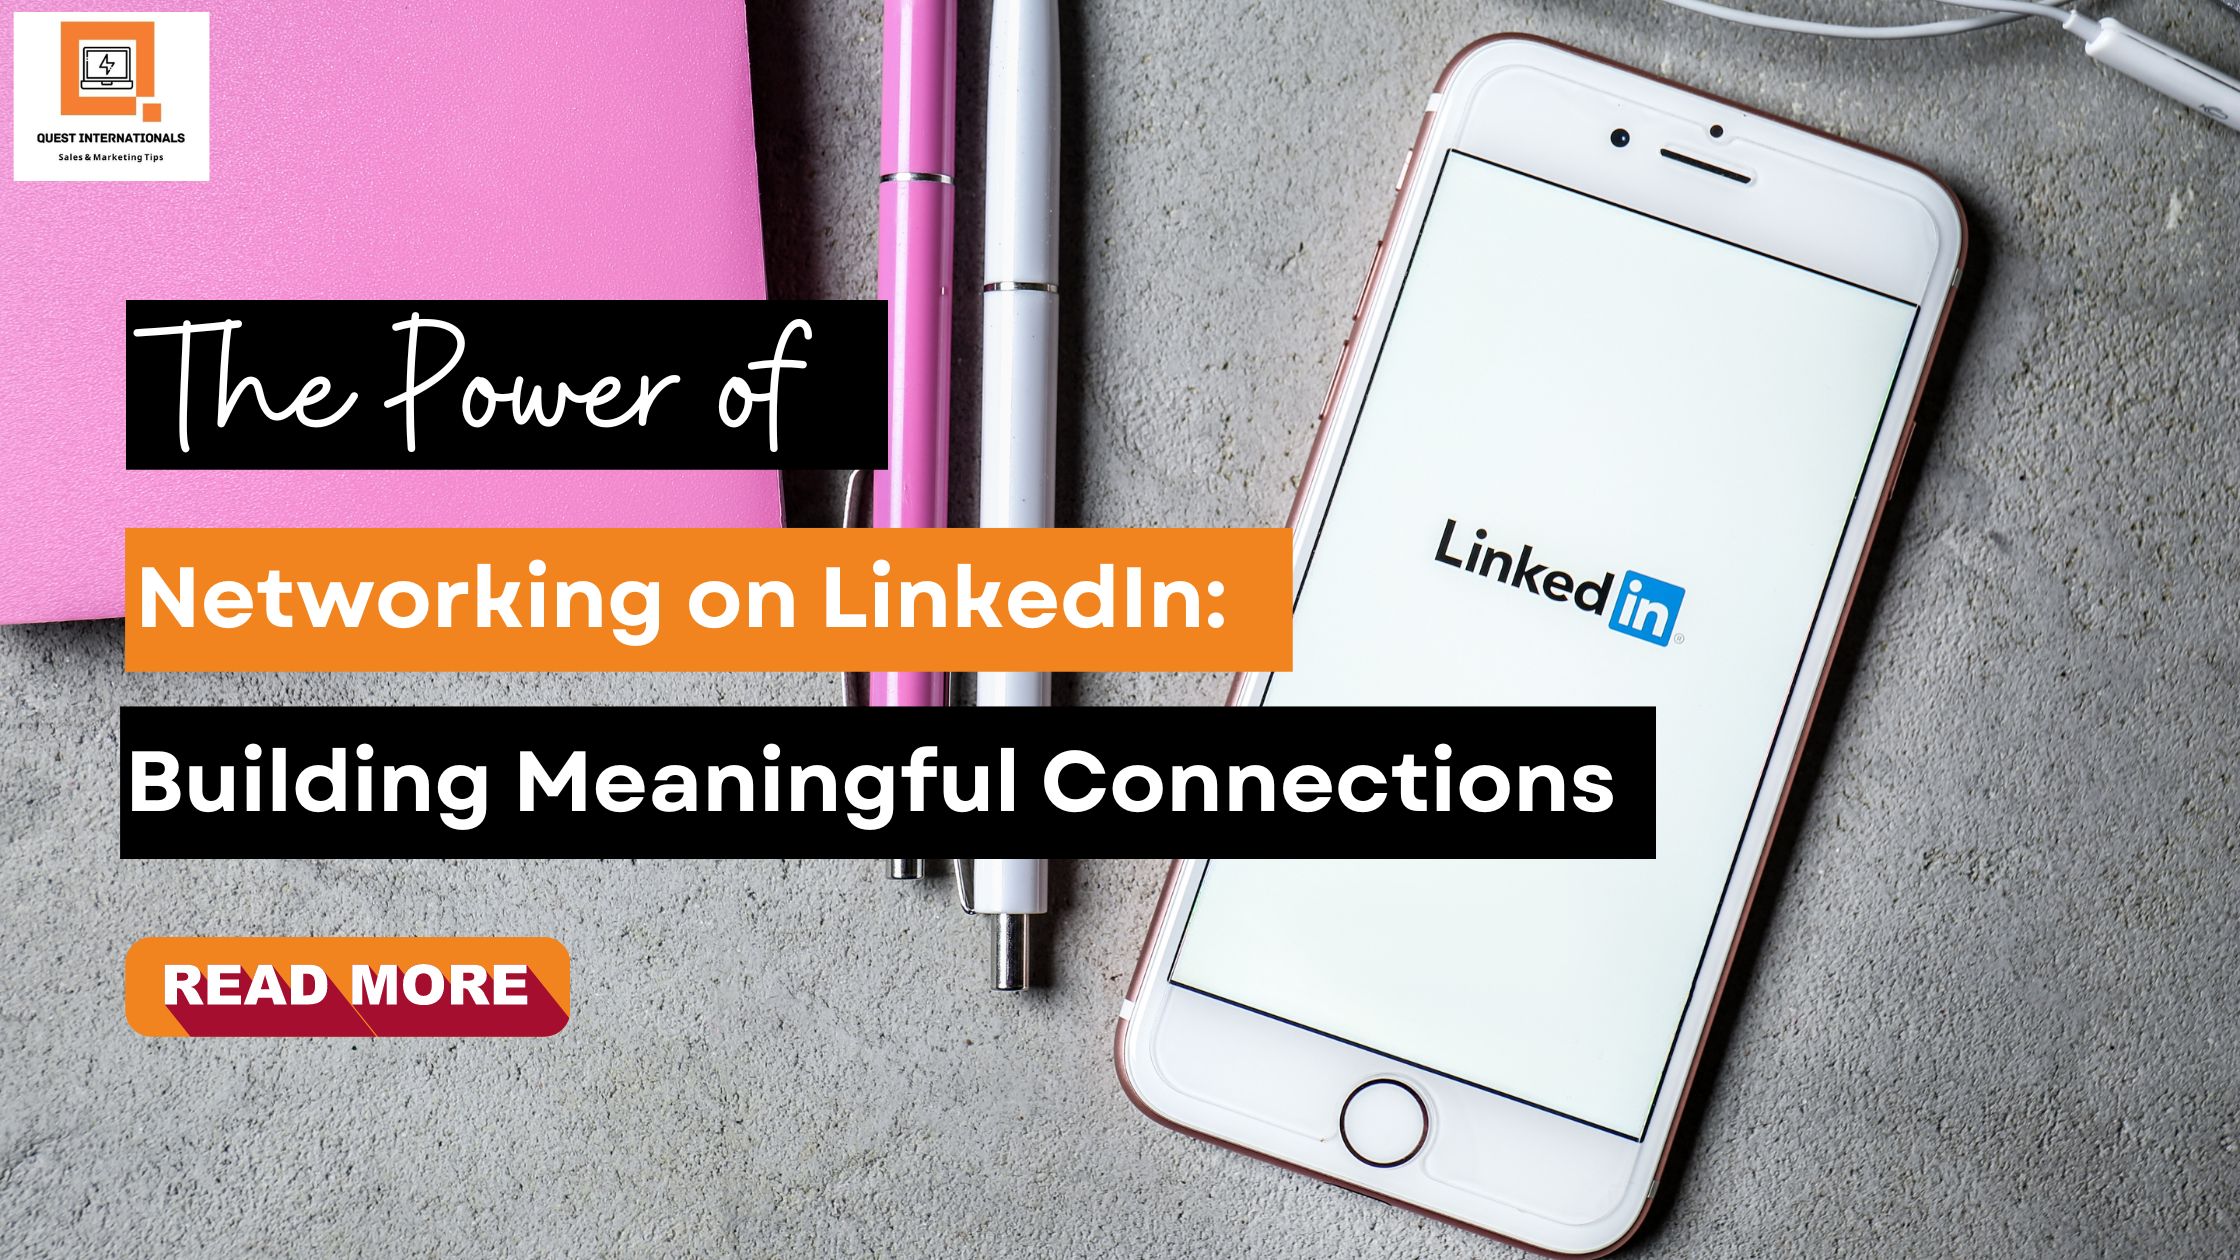 You are currently viewing The Power of Networking on LinkedIn: Building Meaningful Connections